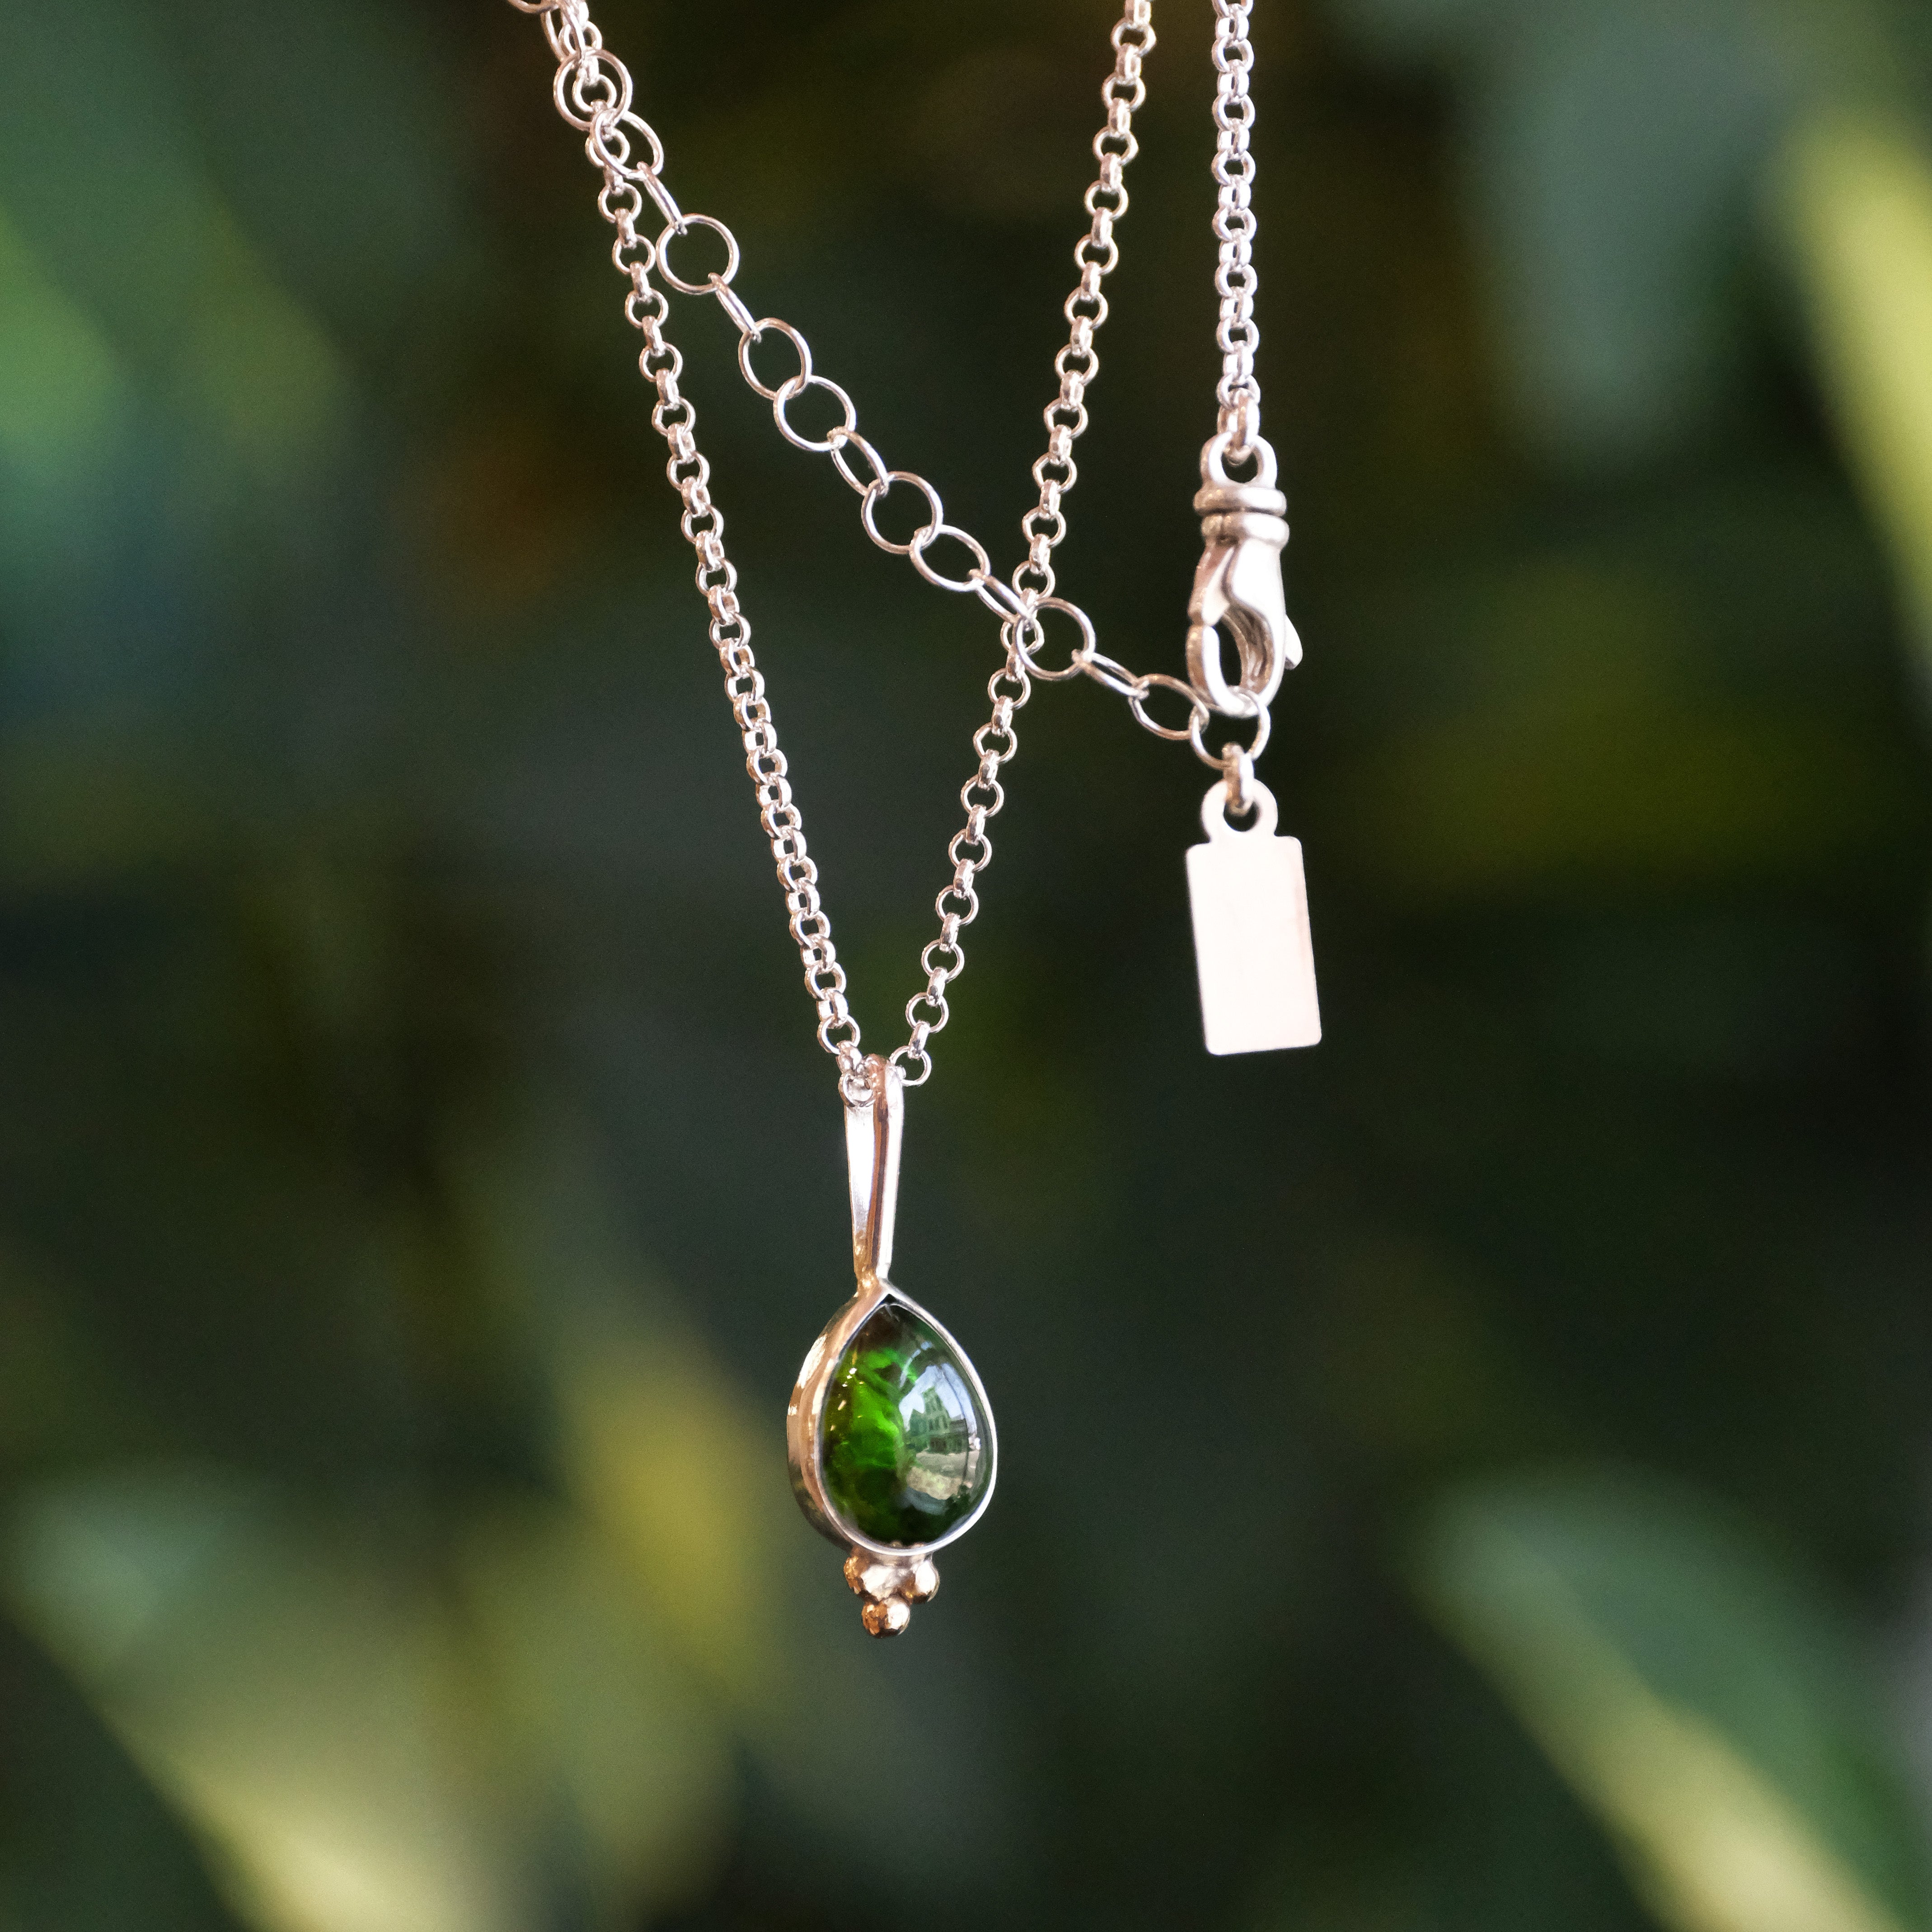 Green Tourmaline Dewdrop Necklace - One of a Kind